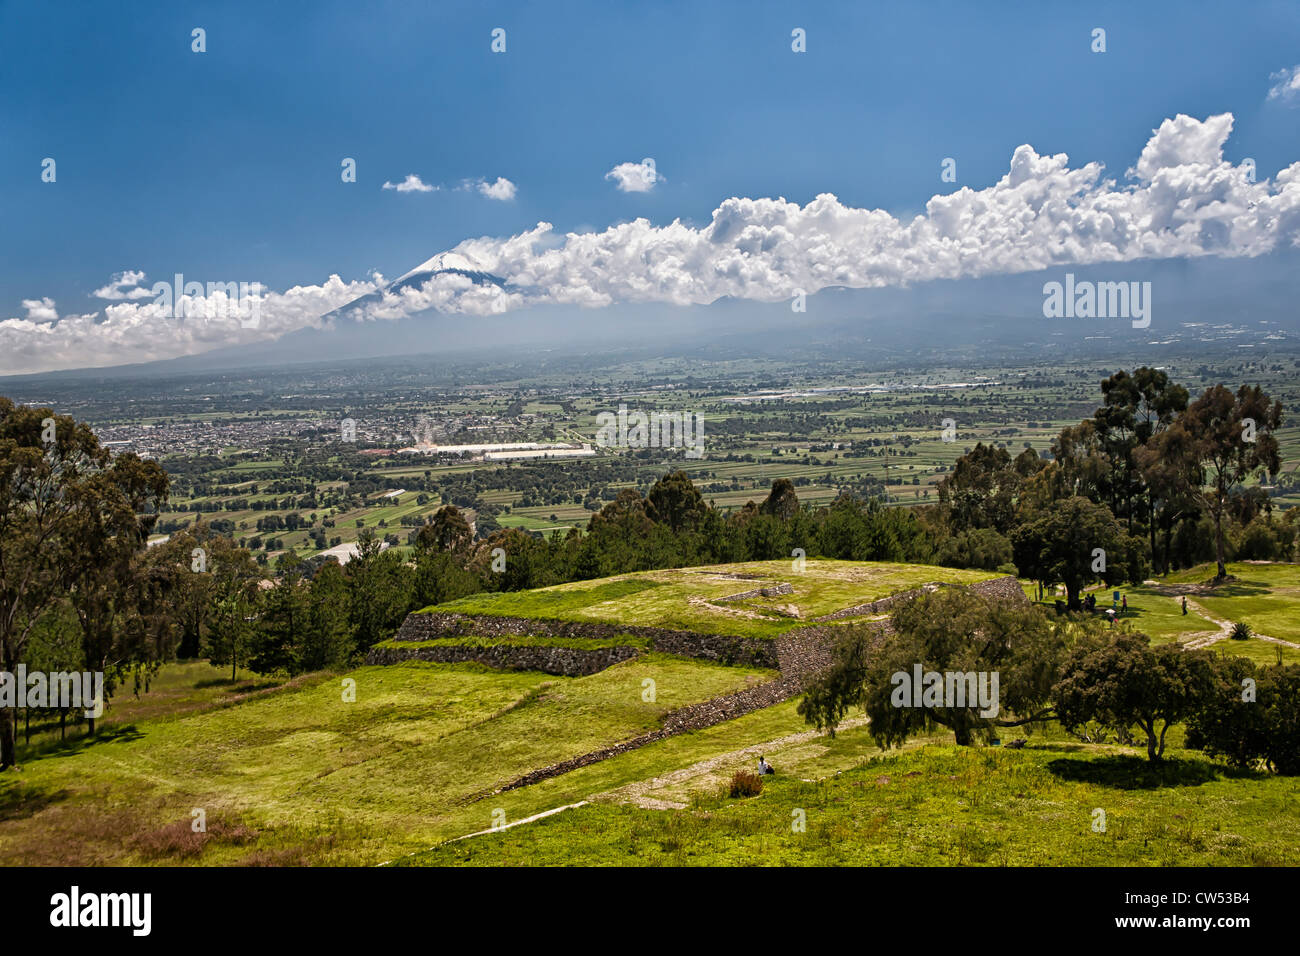 Xochitecatl archaeological site with Mt. Popocatepetl in background in the state of Tlaxcala, Mexico Stock Photo